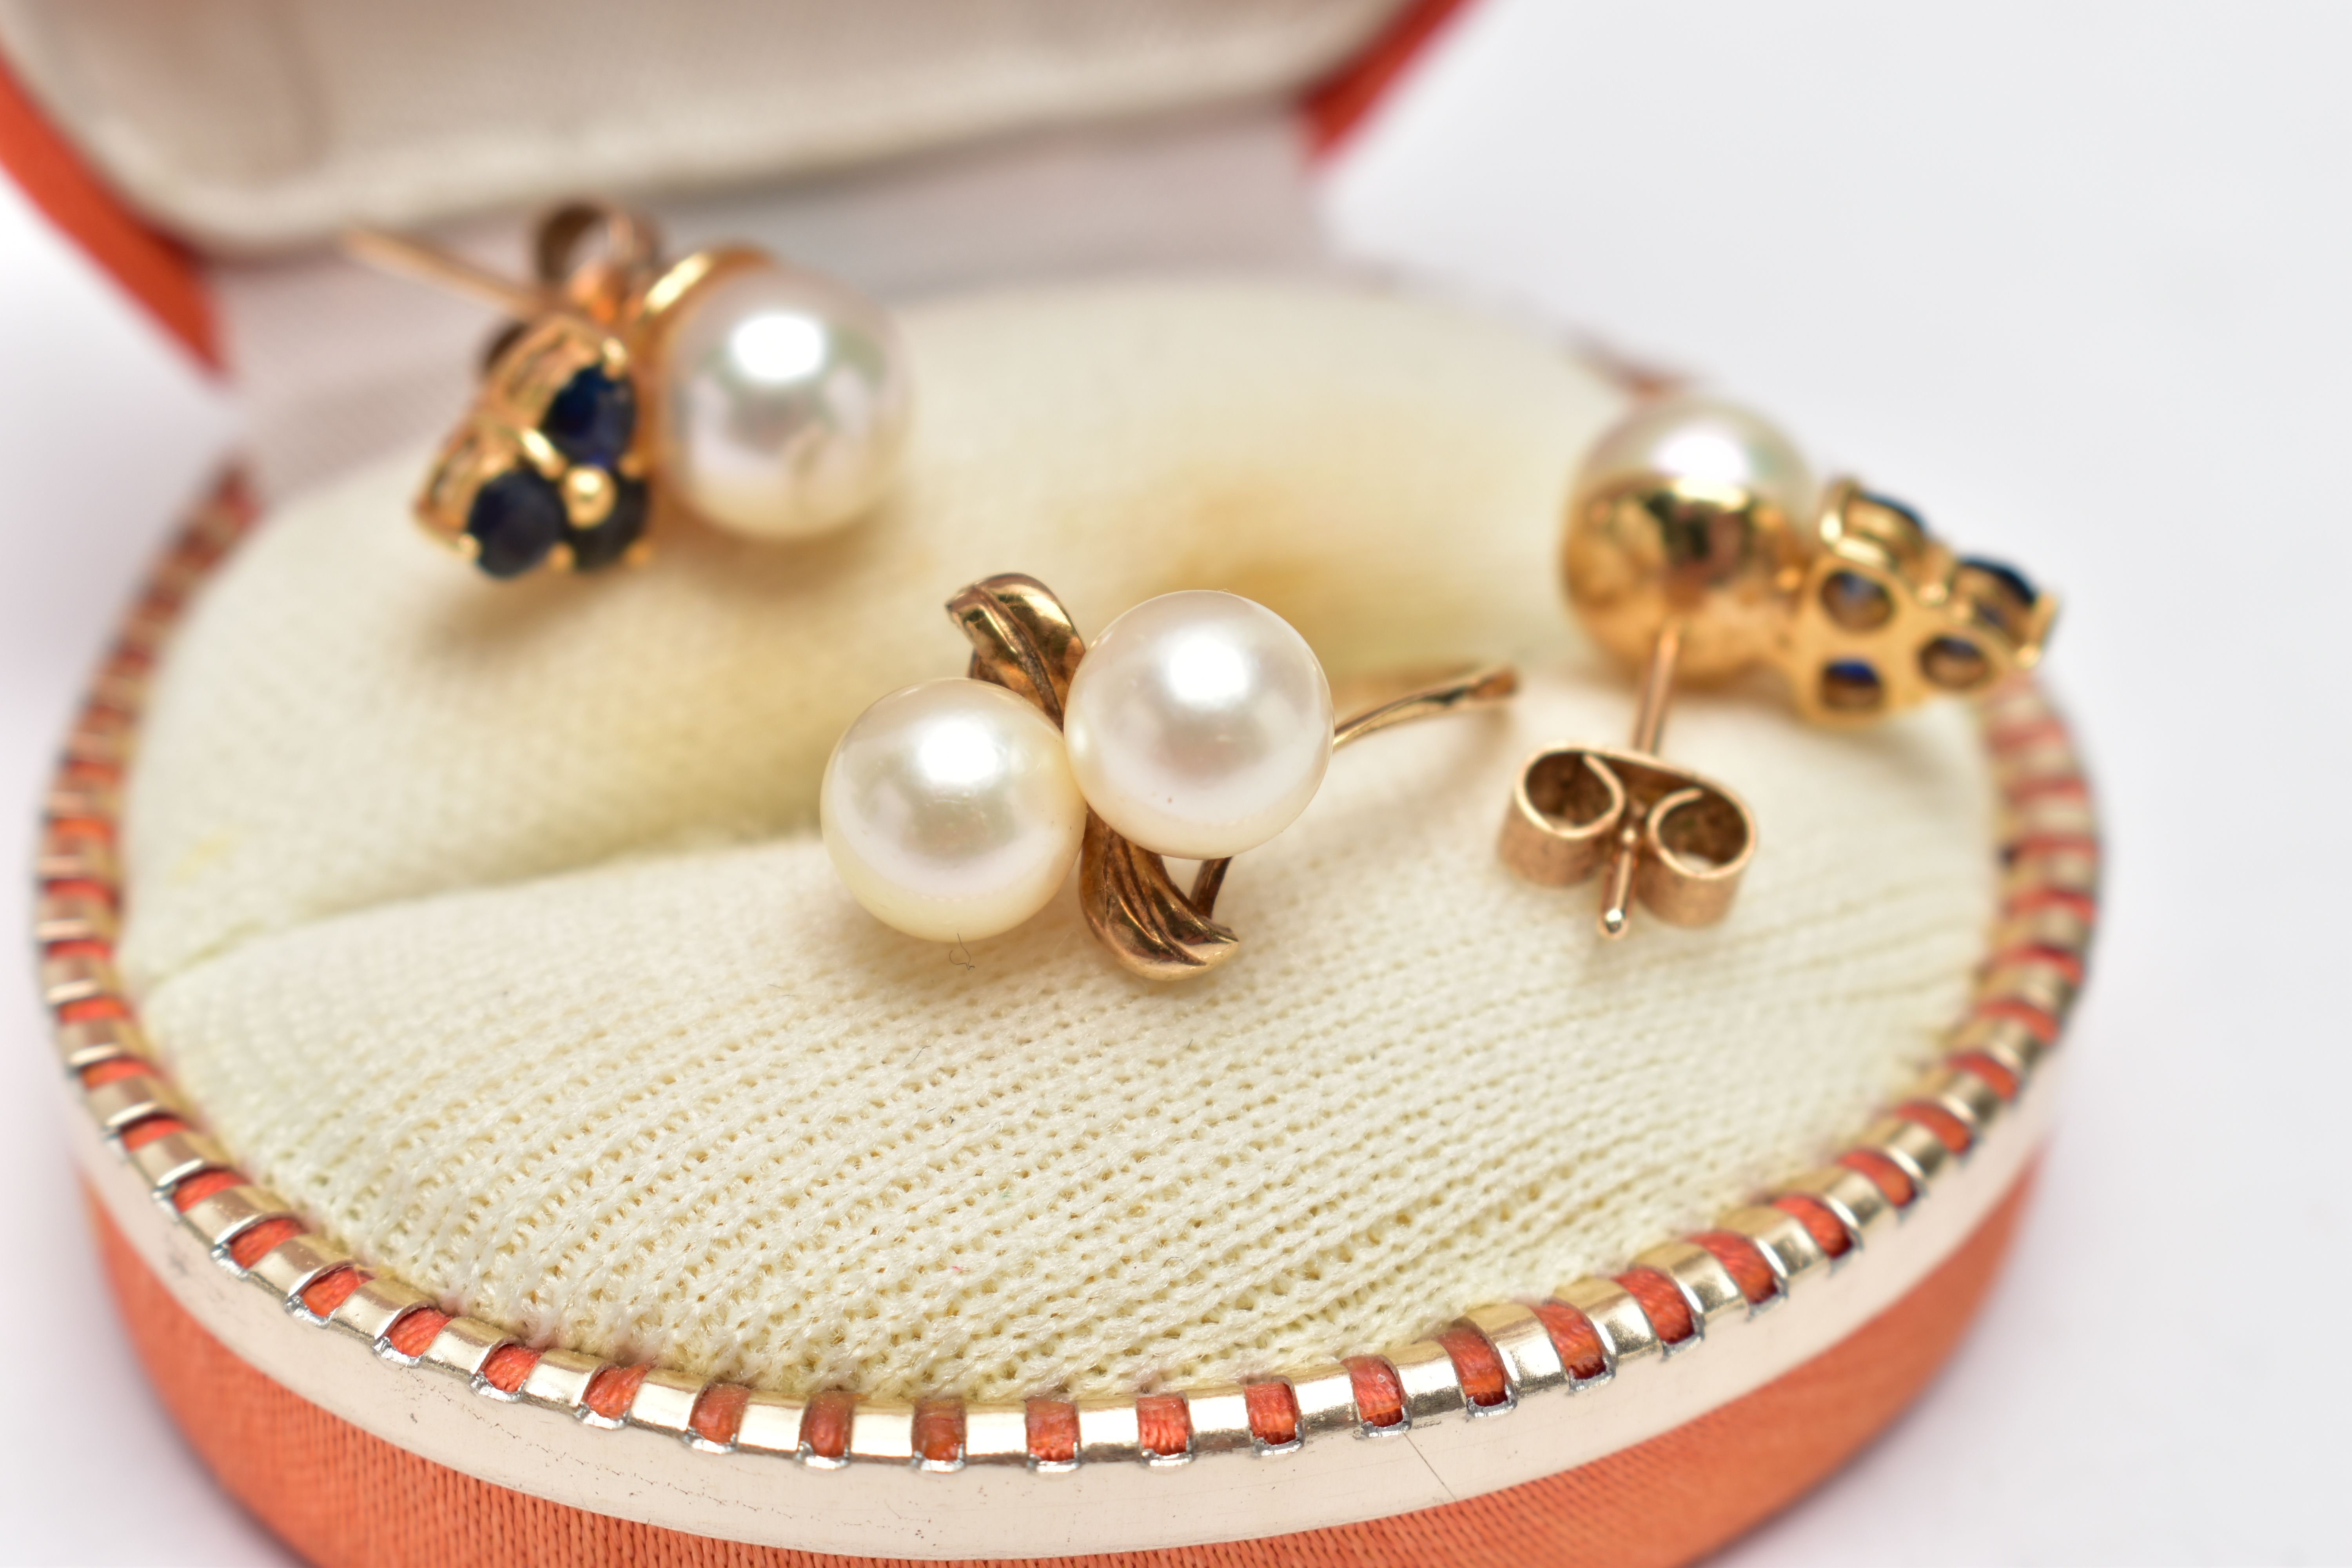 A 9CT GOLD PEARL RING AND PEARL EARRINGS, two cultured pearls set upon a thin yellow gold band, - Image 2 of 3